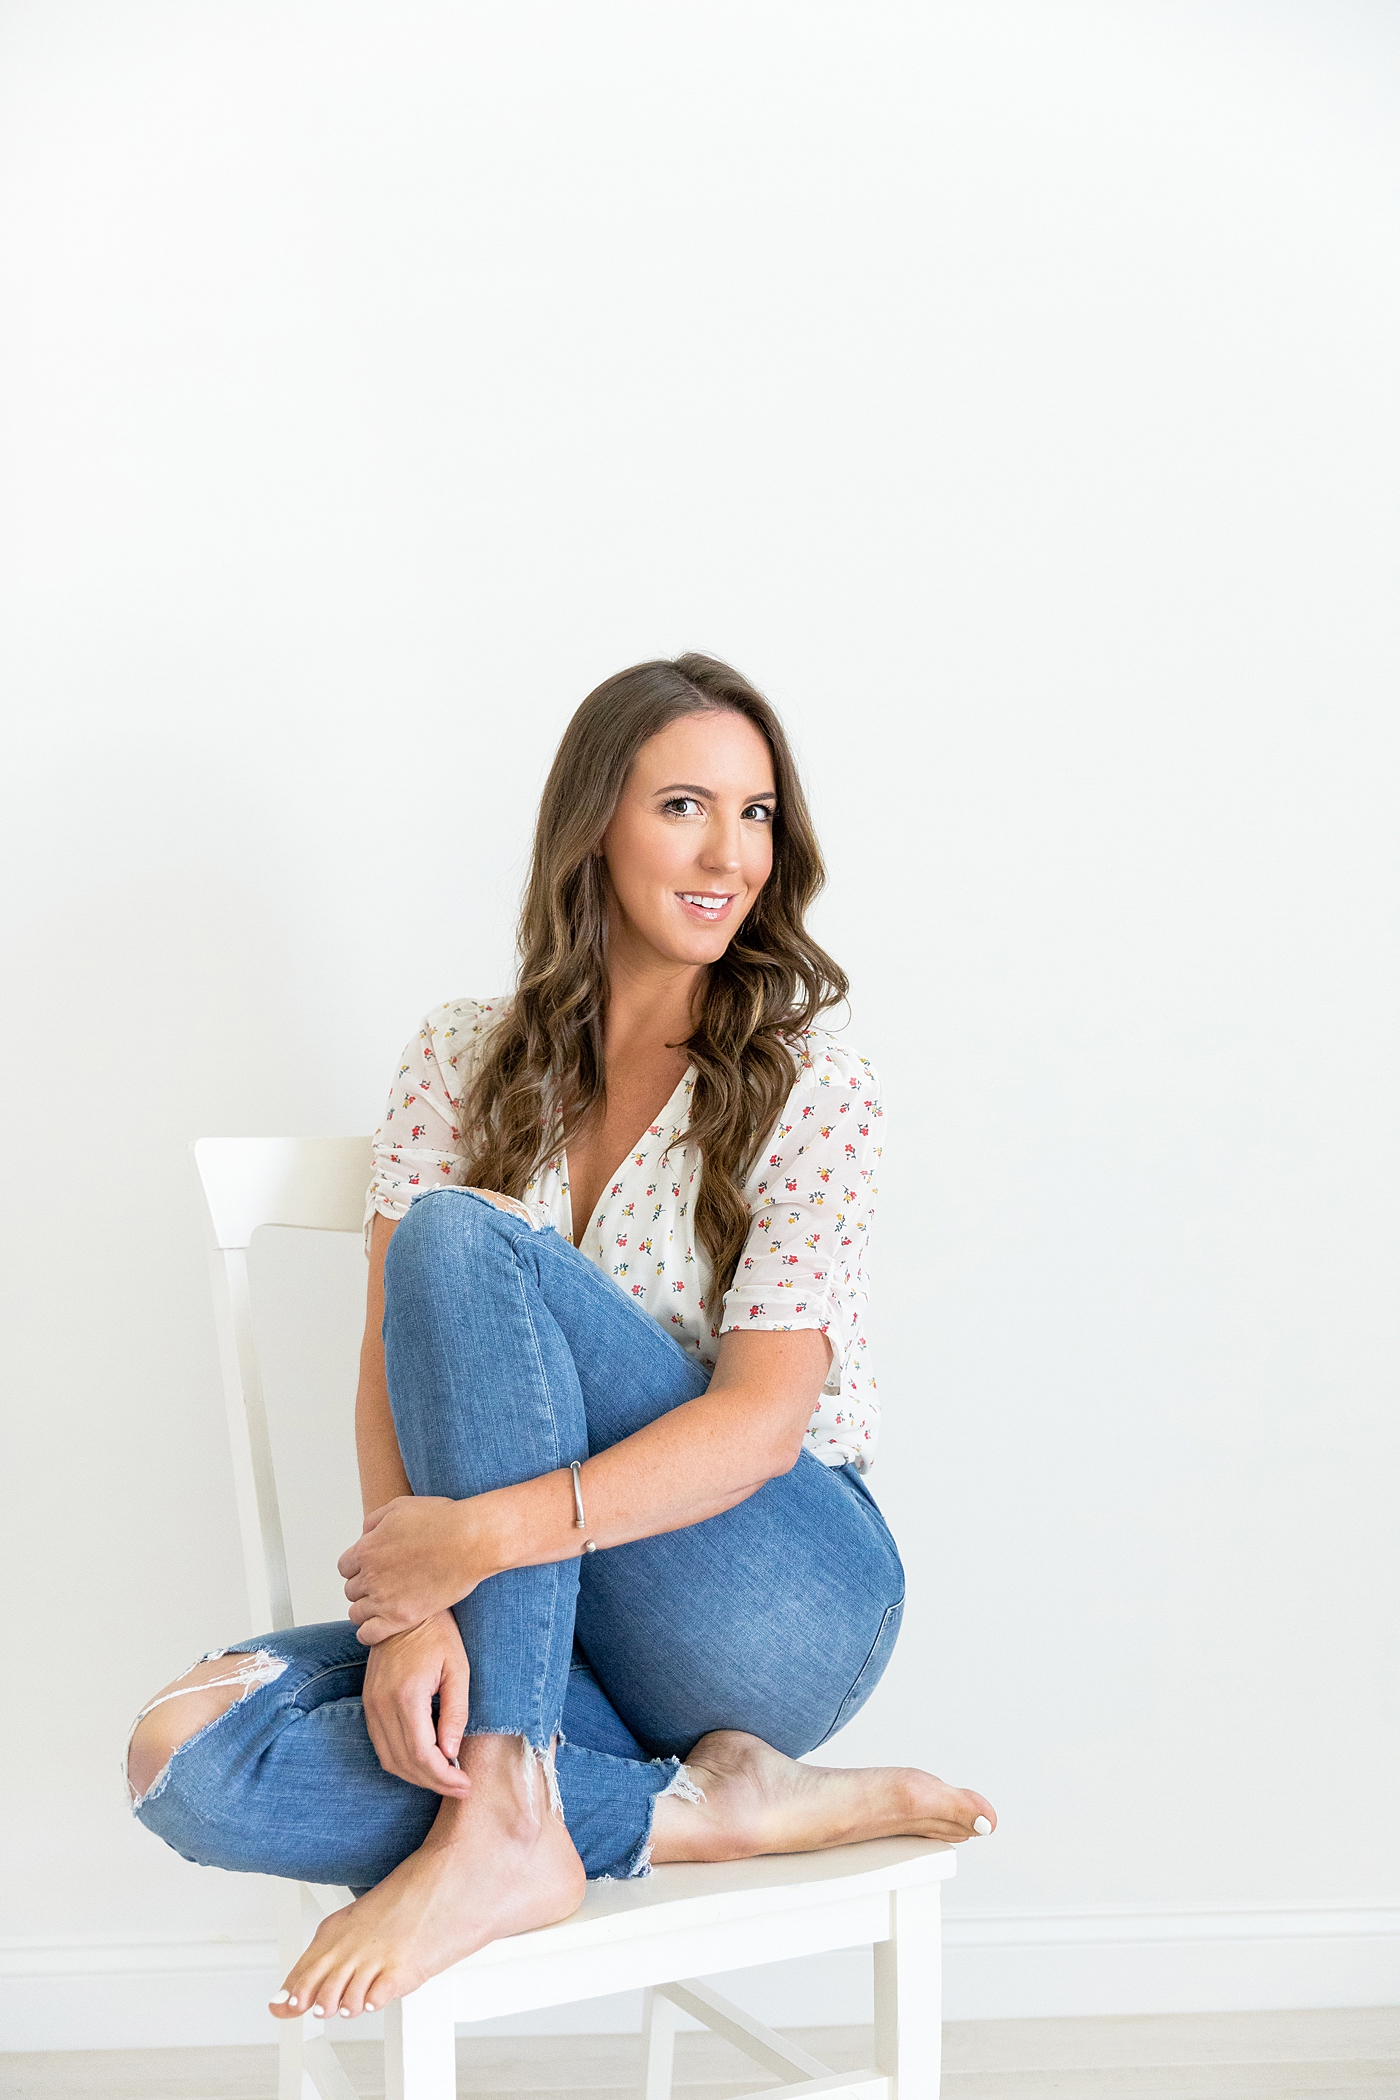 Woman in a white top and jeans sitting in a white chair | Image by Chrissy Winchester Photography